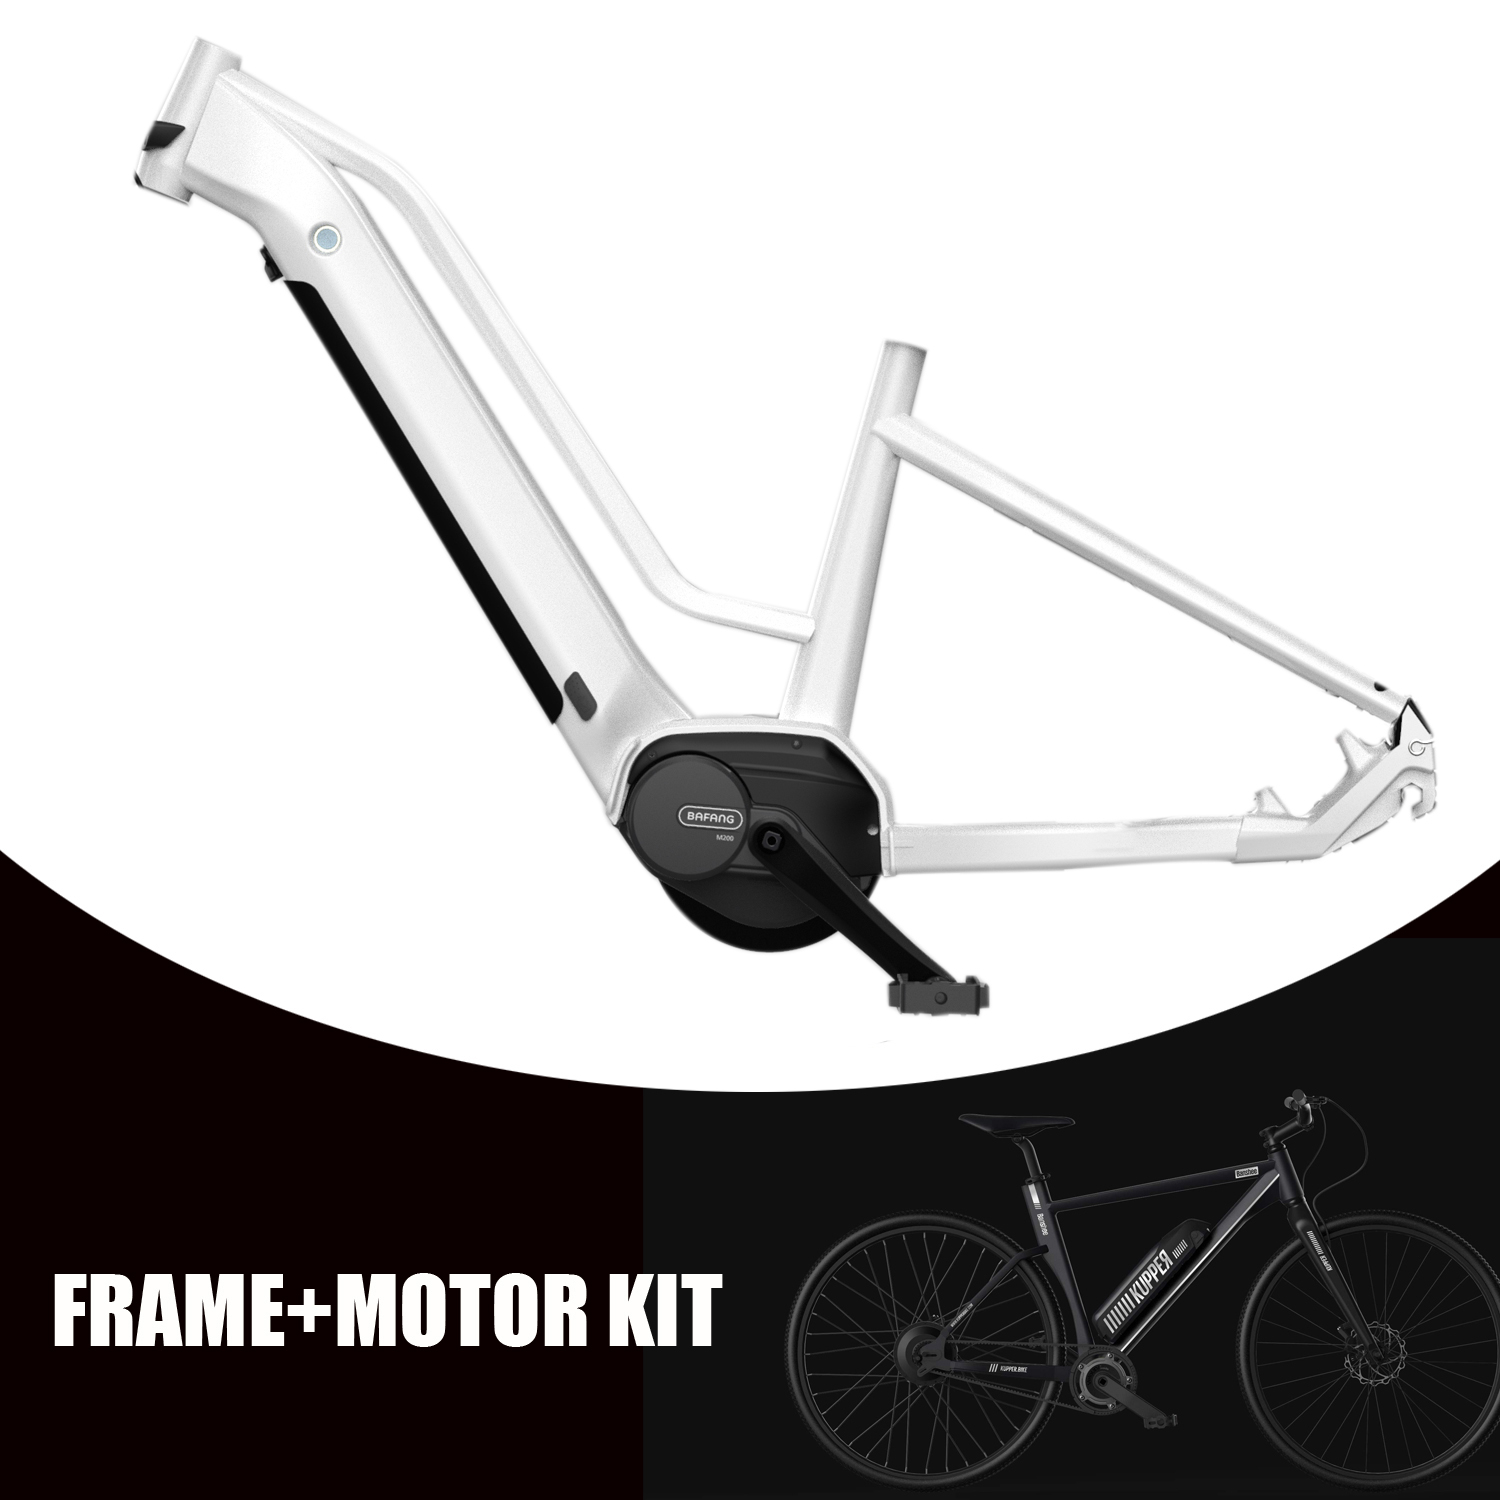 China Wholesale 350w Mid Drive Motor Factories - Custom Electric Road Bike Frame With Bafang Mid Drive Motor Electric Bicycle Frame For City Bike – Eecycle